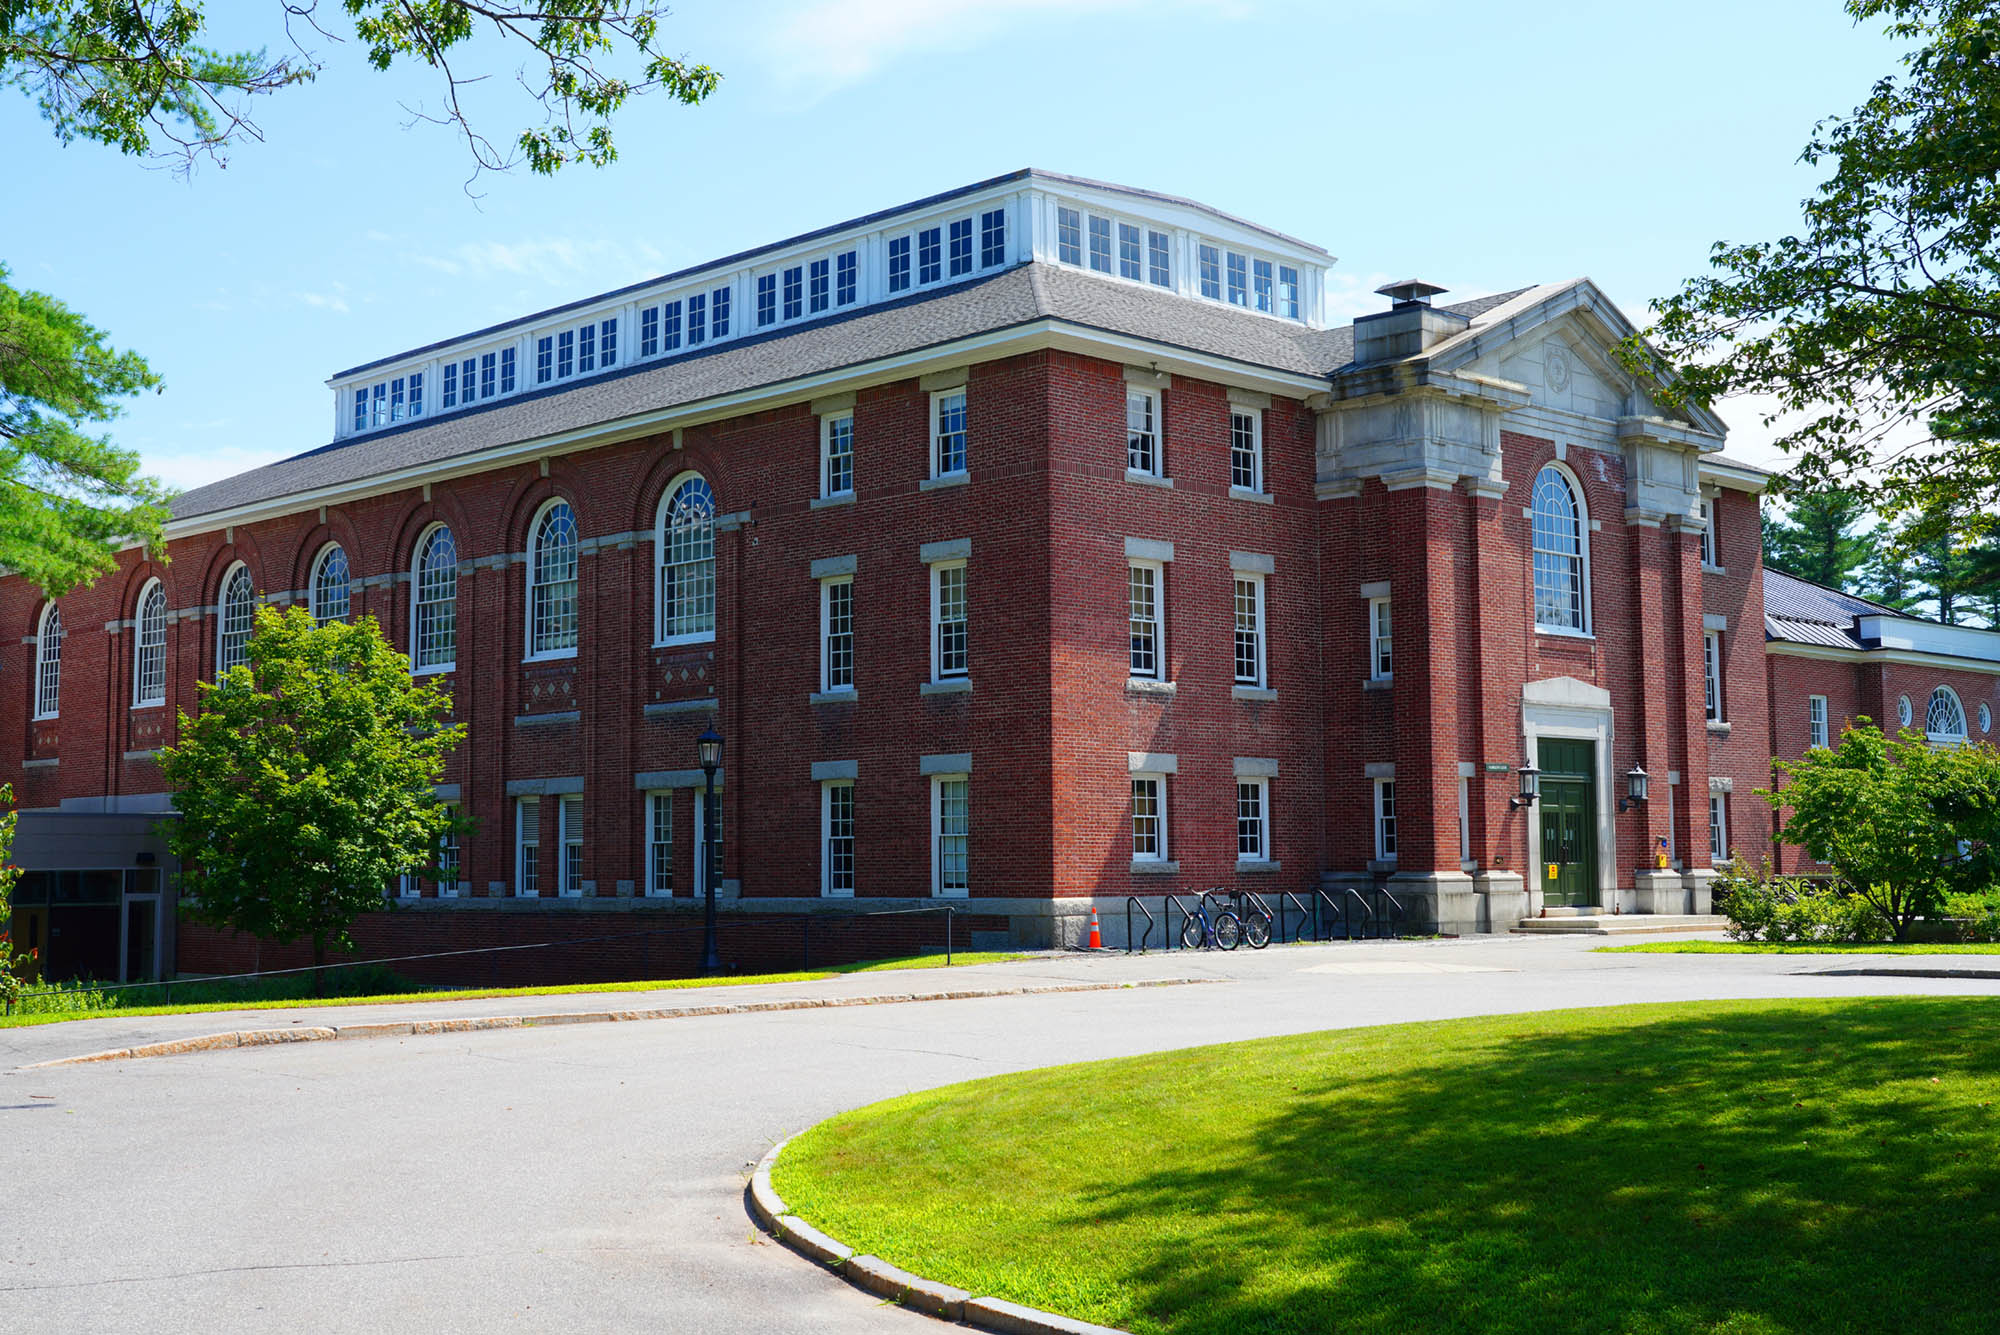 View of the campus of Bowdoin College, a private liberal arts college located in Brunswick, Maine, United States.